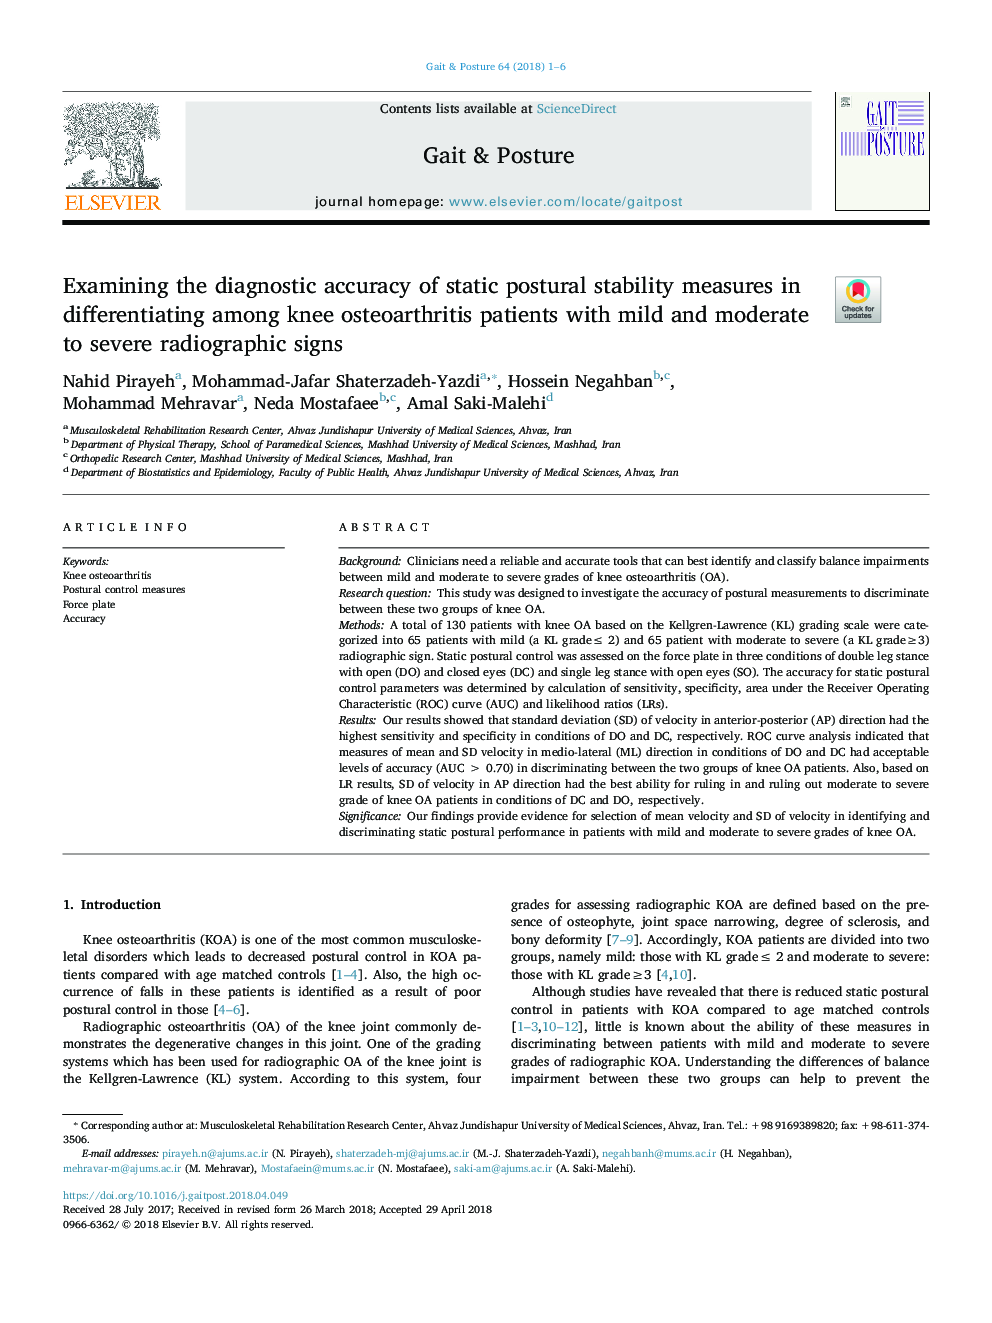 Examining the diagnostic accuracy of static postural stability measures in differentiating among knee osteoarthritis patients with mild and moderate to severe radiographic signs